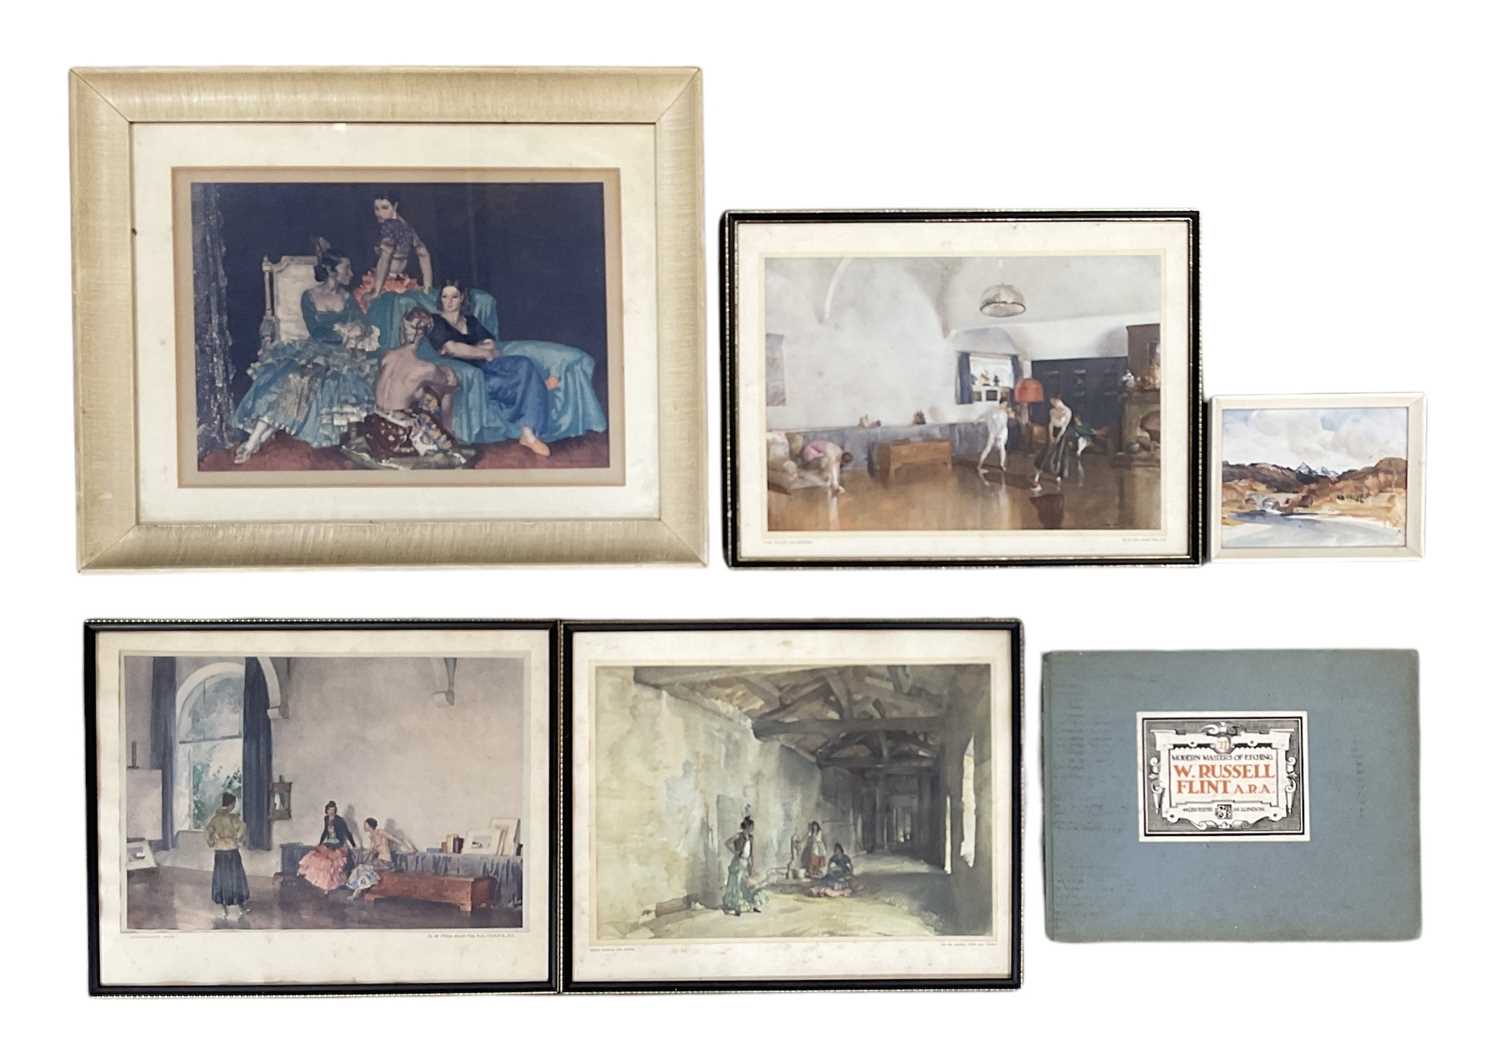 WILLIAM RUSSELL FLINT; 'Modern Masters of Etching' book, four William Russell Flint framed prints